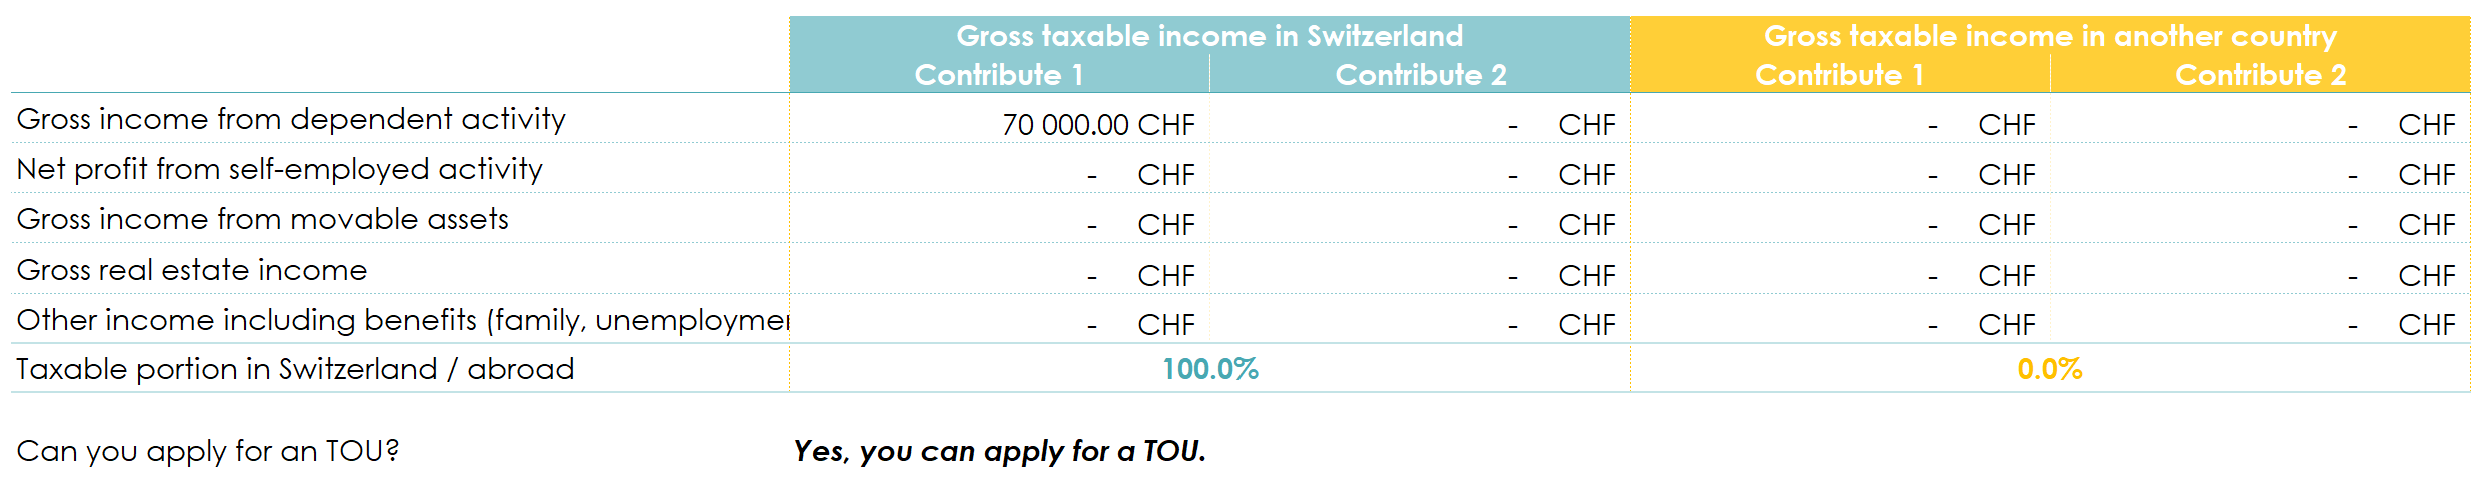 Table showing the distribution of the taxable portion of gross income between Switzerland and abroad